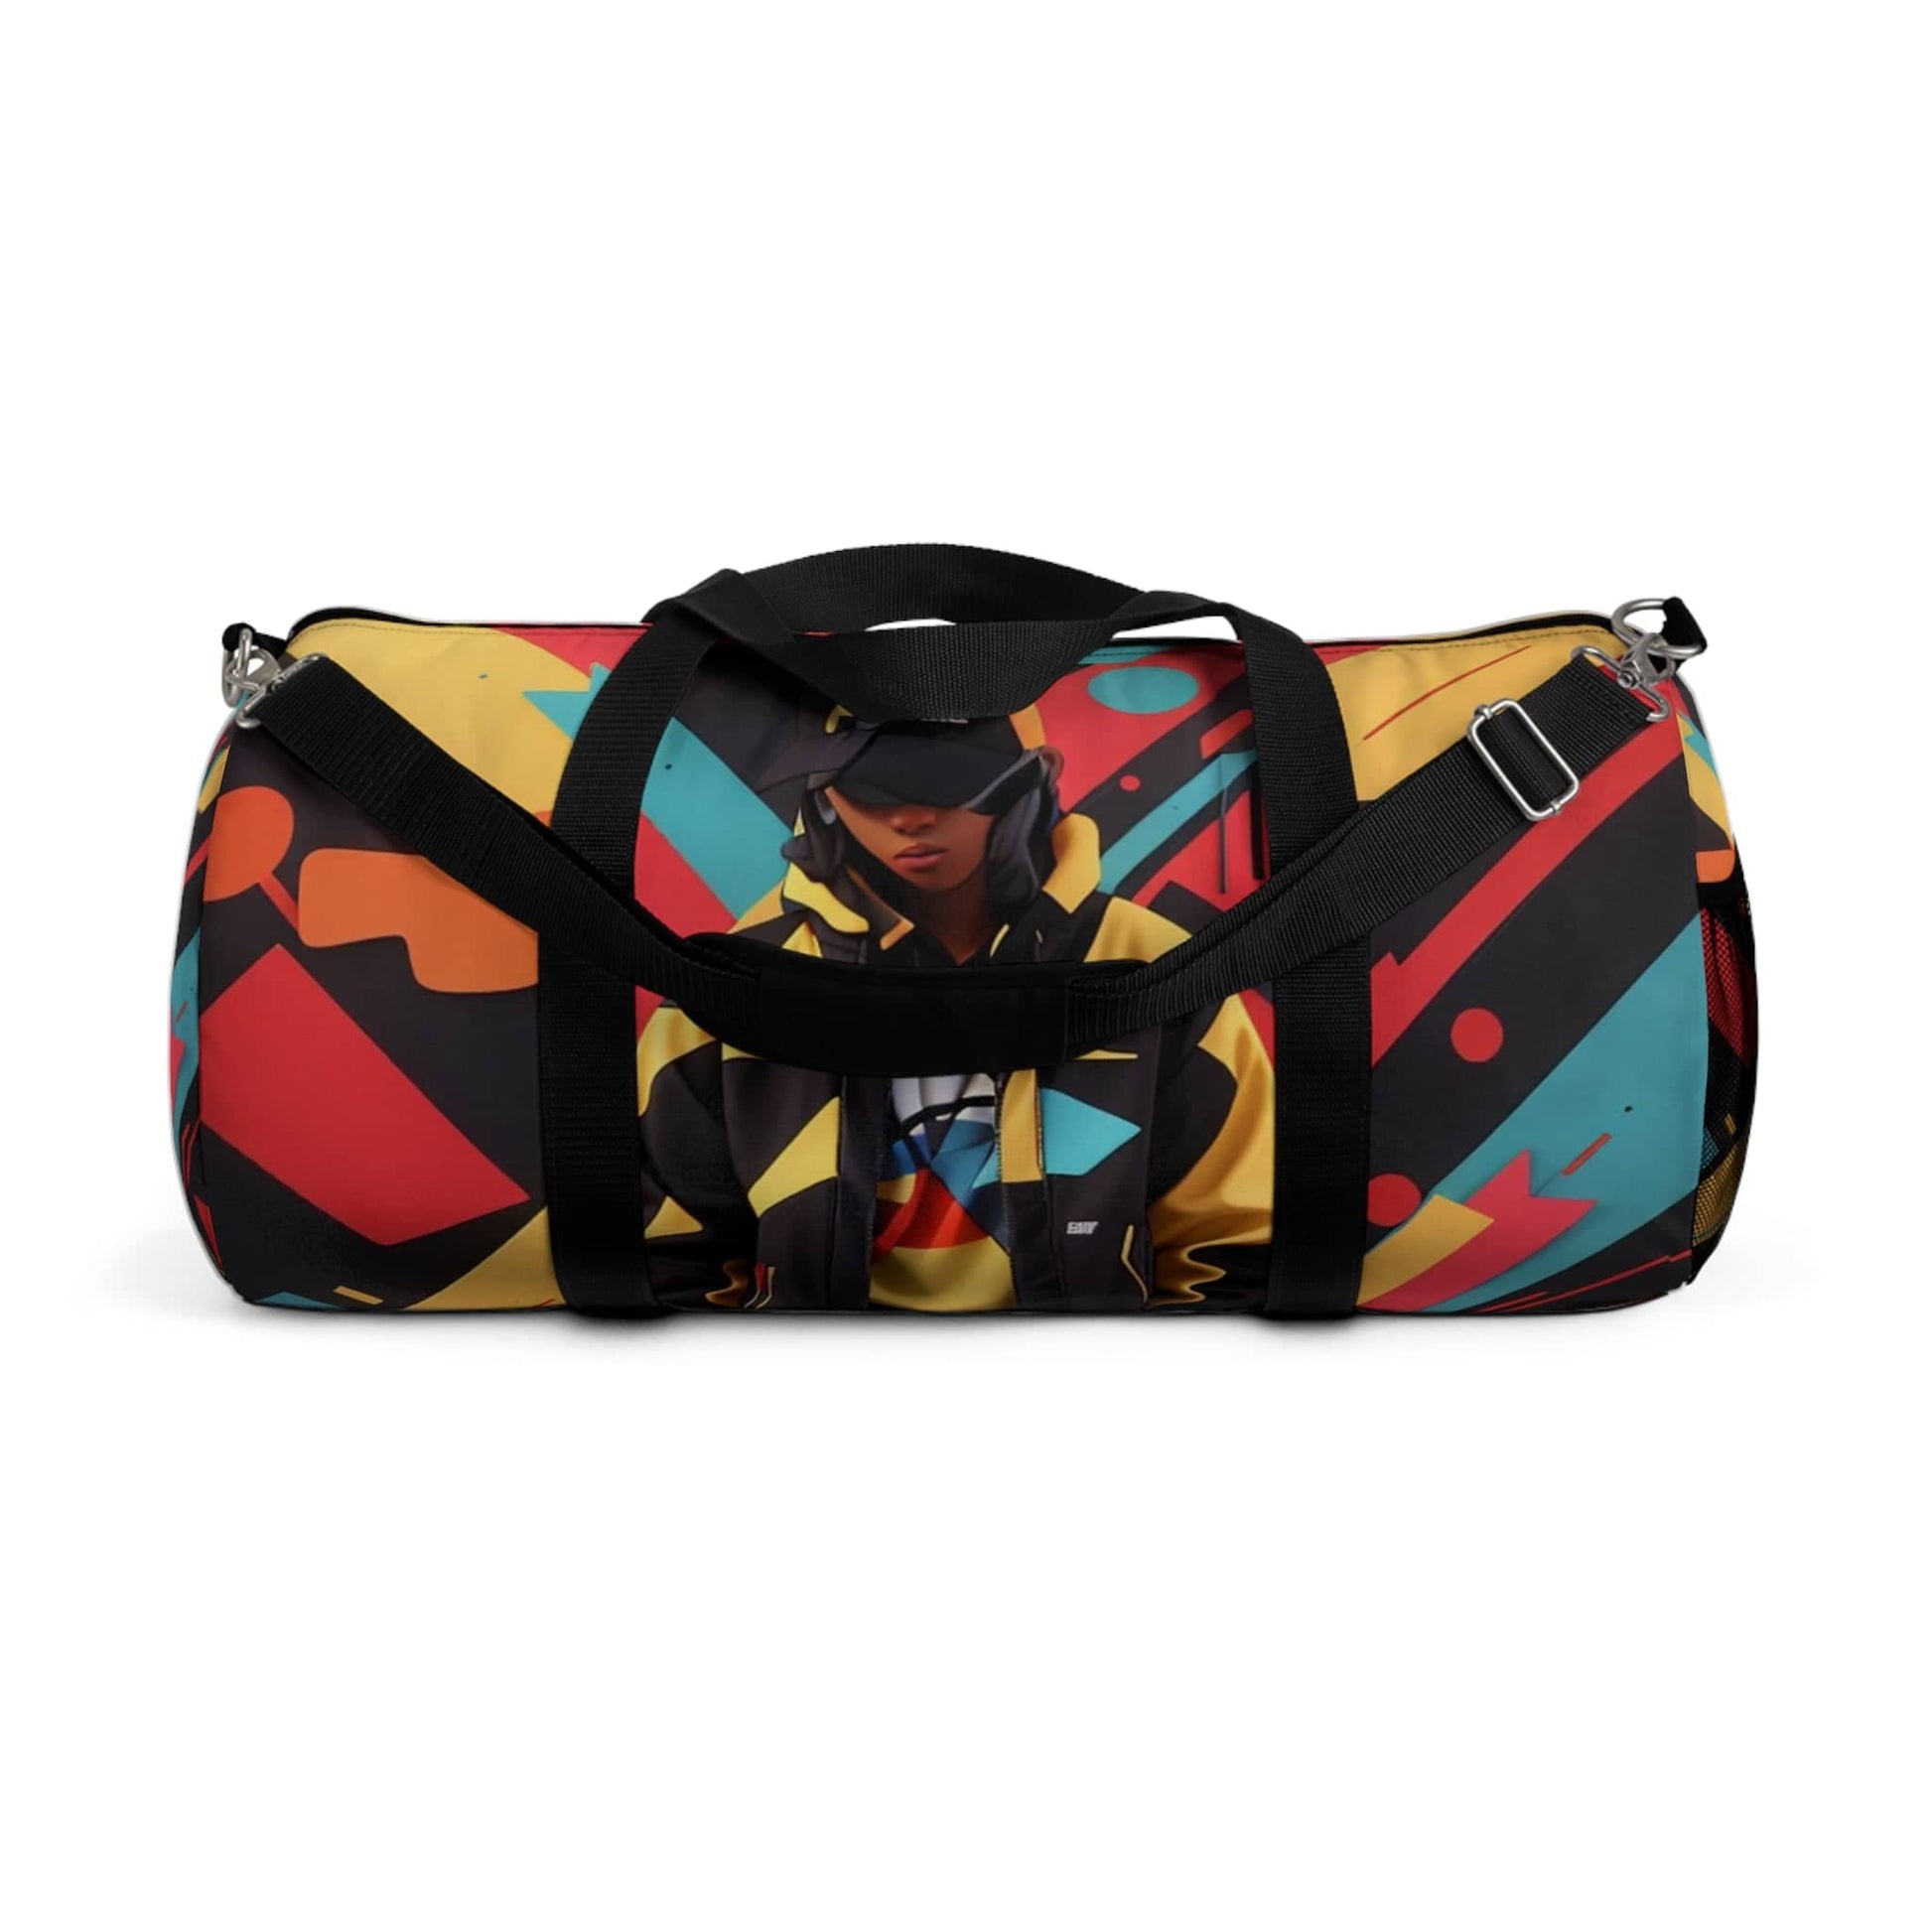 "Street Art at Your Back Duffle: An Urban Nomad's Essentials - The Ultimate Blend of Practicality, Hip-Hop, Street Style, and Striking Design" Bags Bigger Than Life   